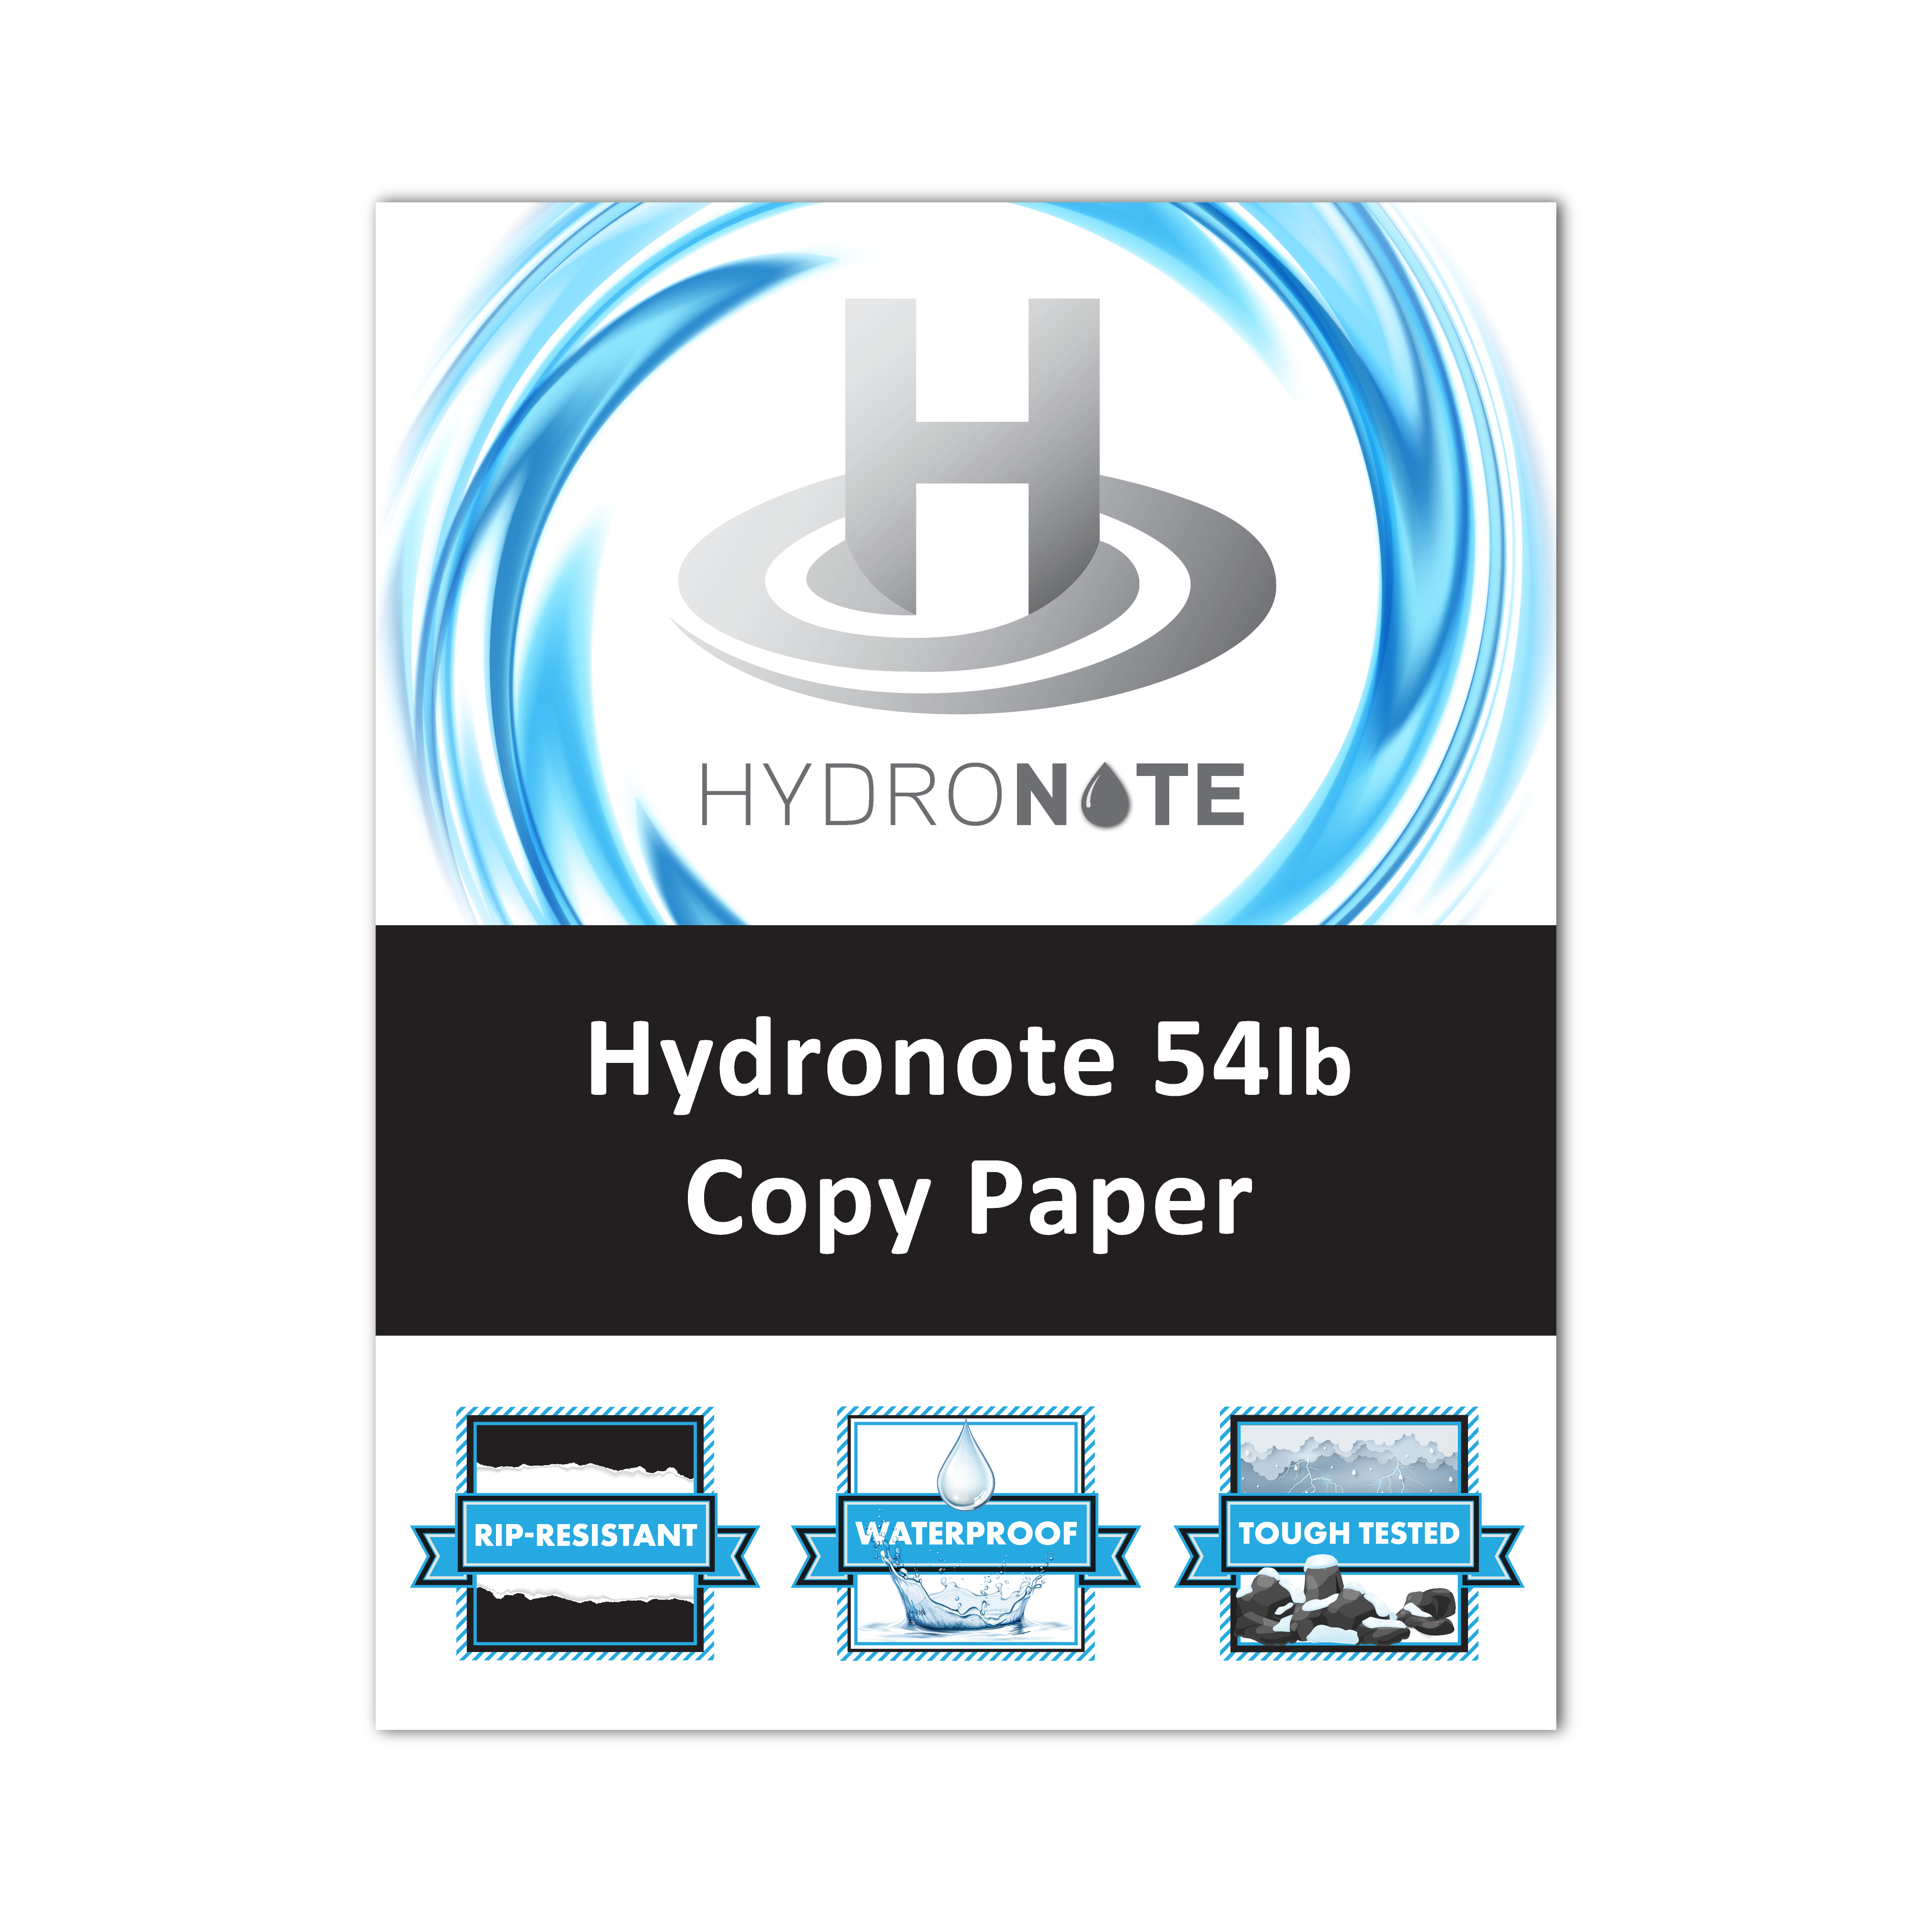 Hydronote Samples